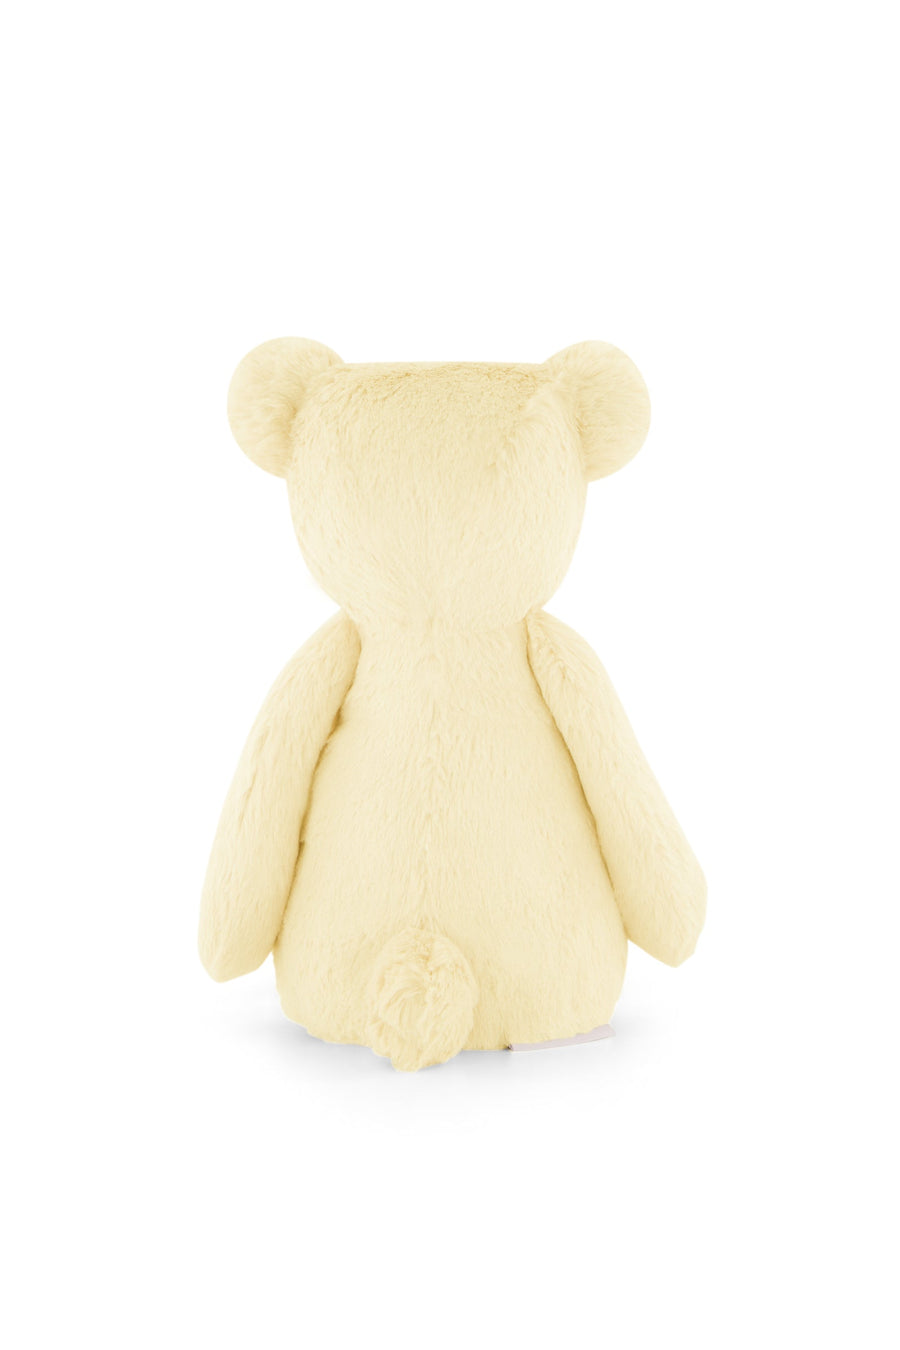 Snuggle Bunnies - George the Bear - Anise Childrens Toy from Jamie Kay USA